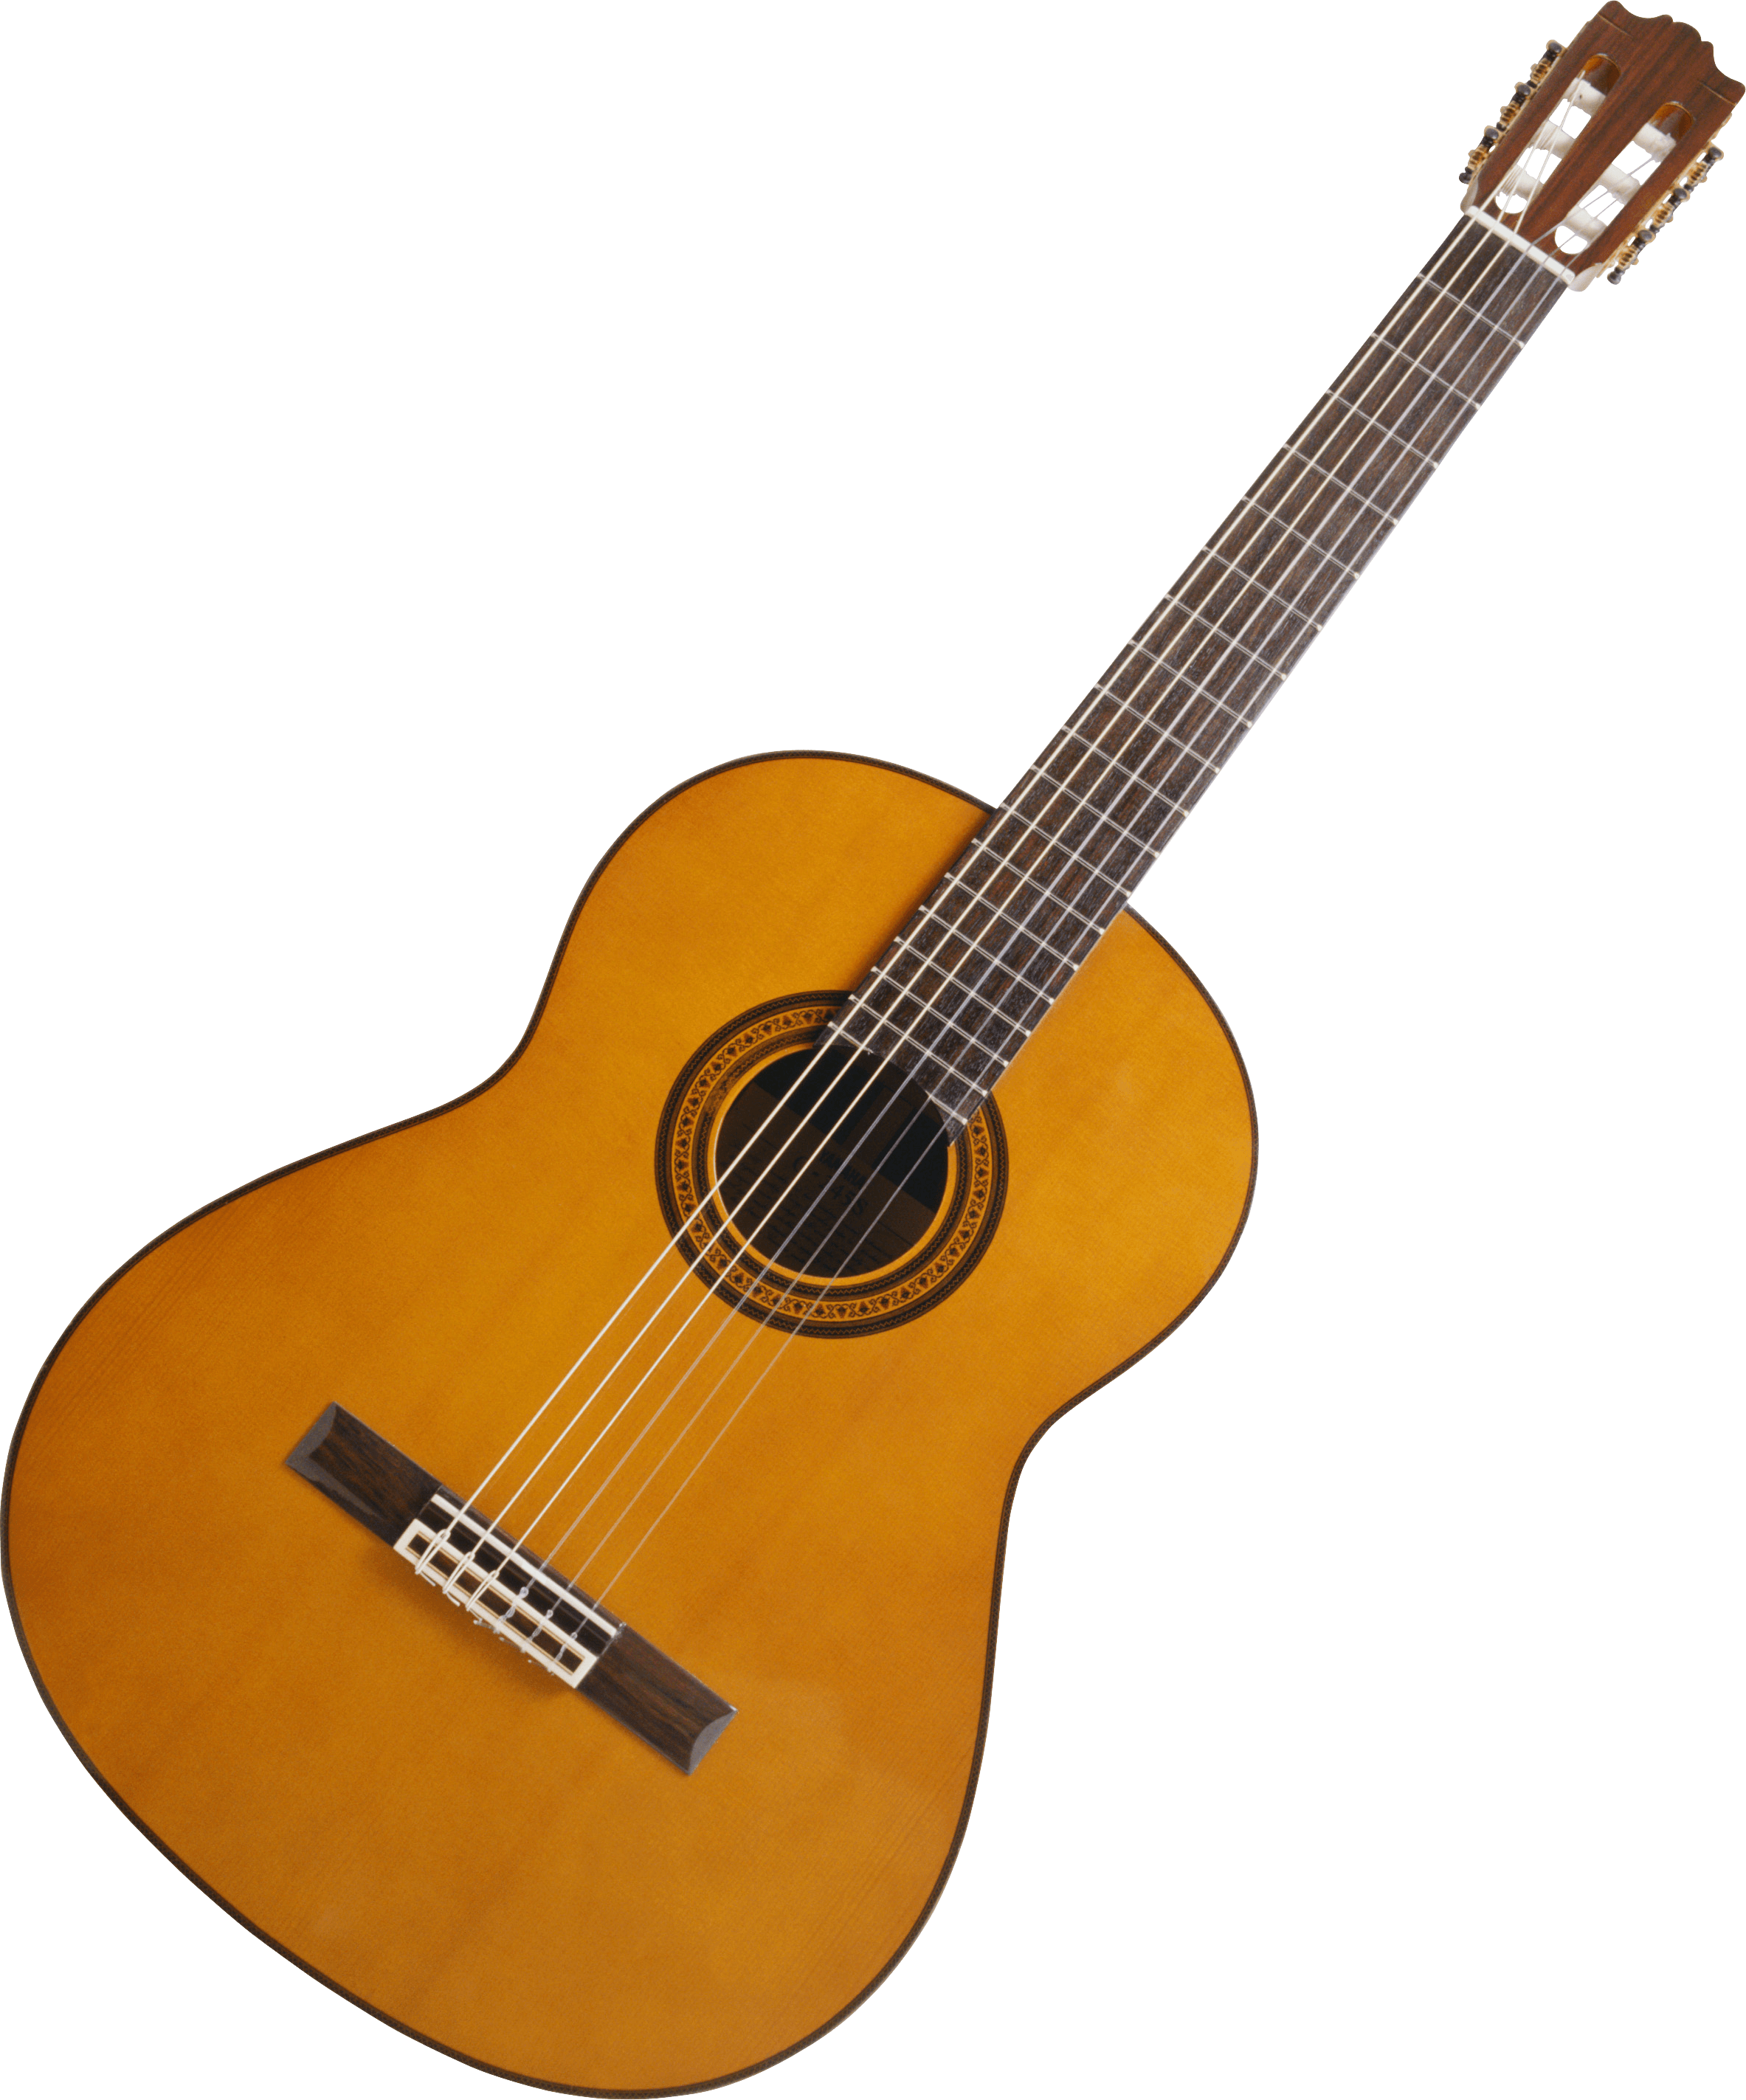 Acoustic Wooden Guitar Png Image Png Image - Acoustic, Transparent background PNG HD thumbnail